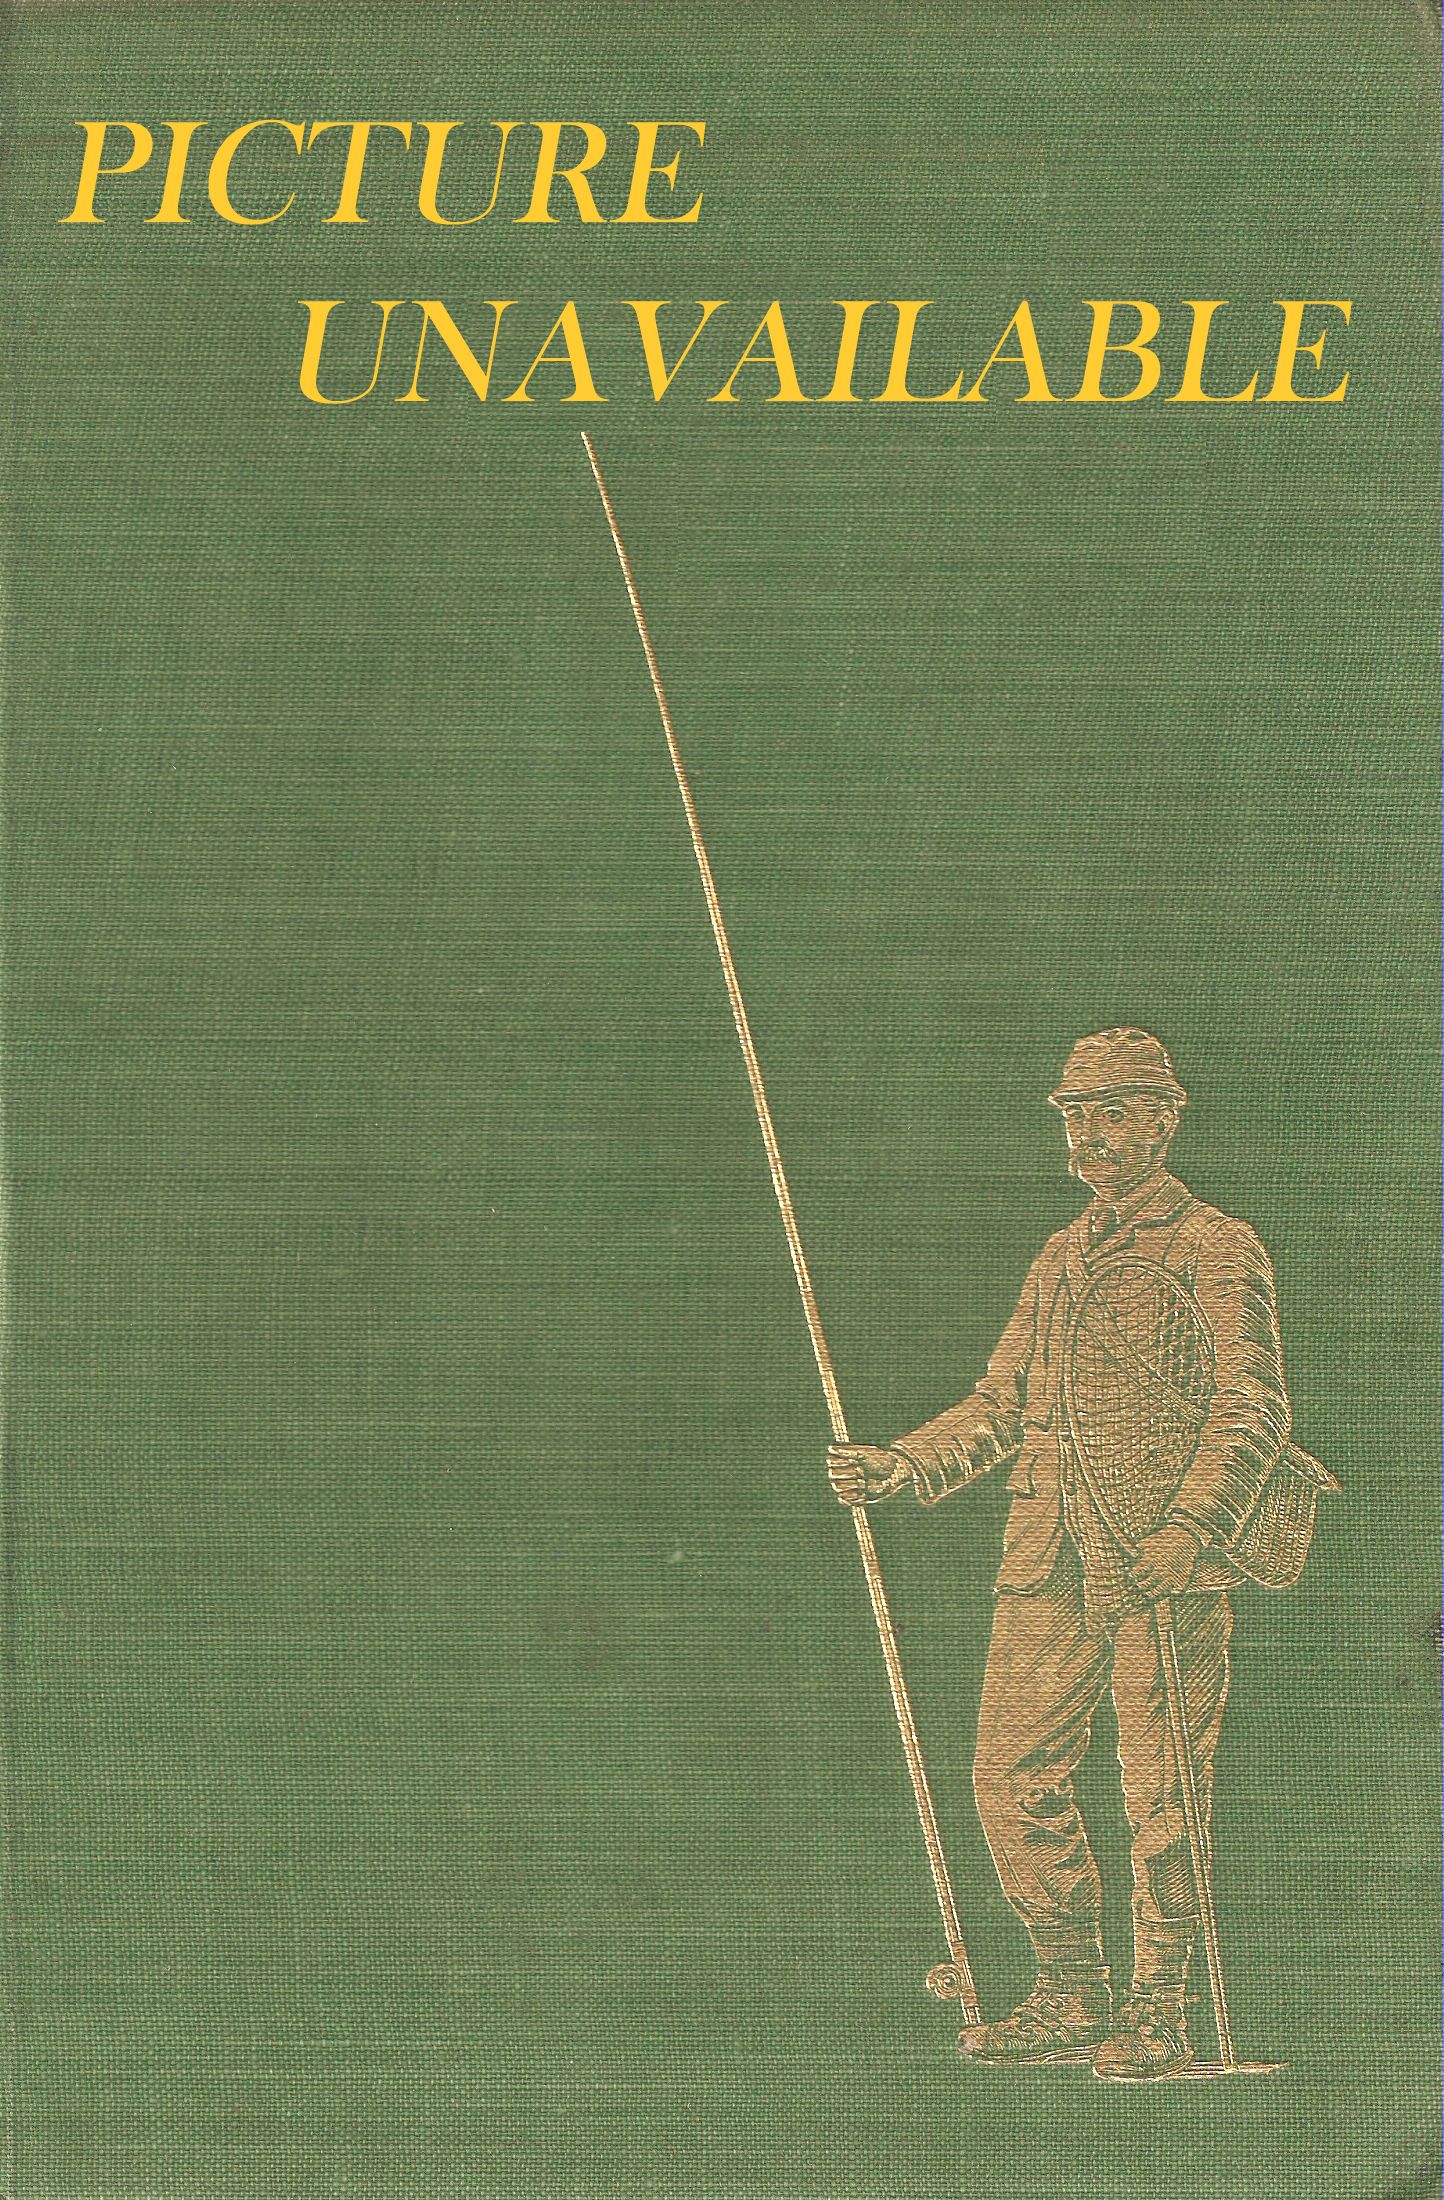 ANGLERS' FISHES and THEIR NATURAL HISTORY. The Lonsdale Library Vol. XXXIV.  By Eric Taverner.